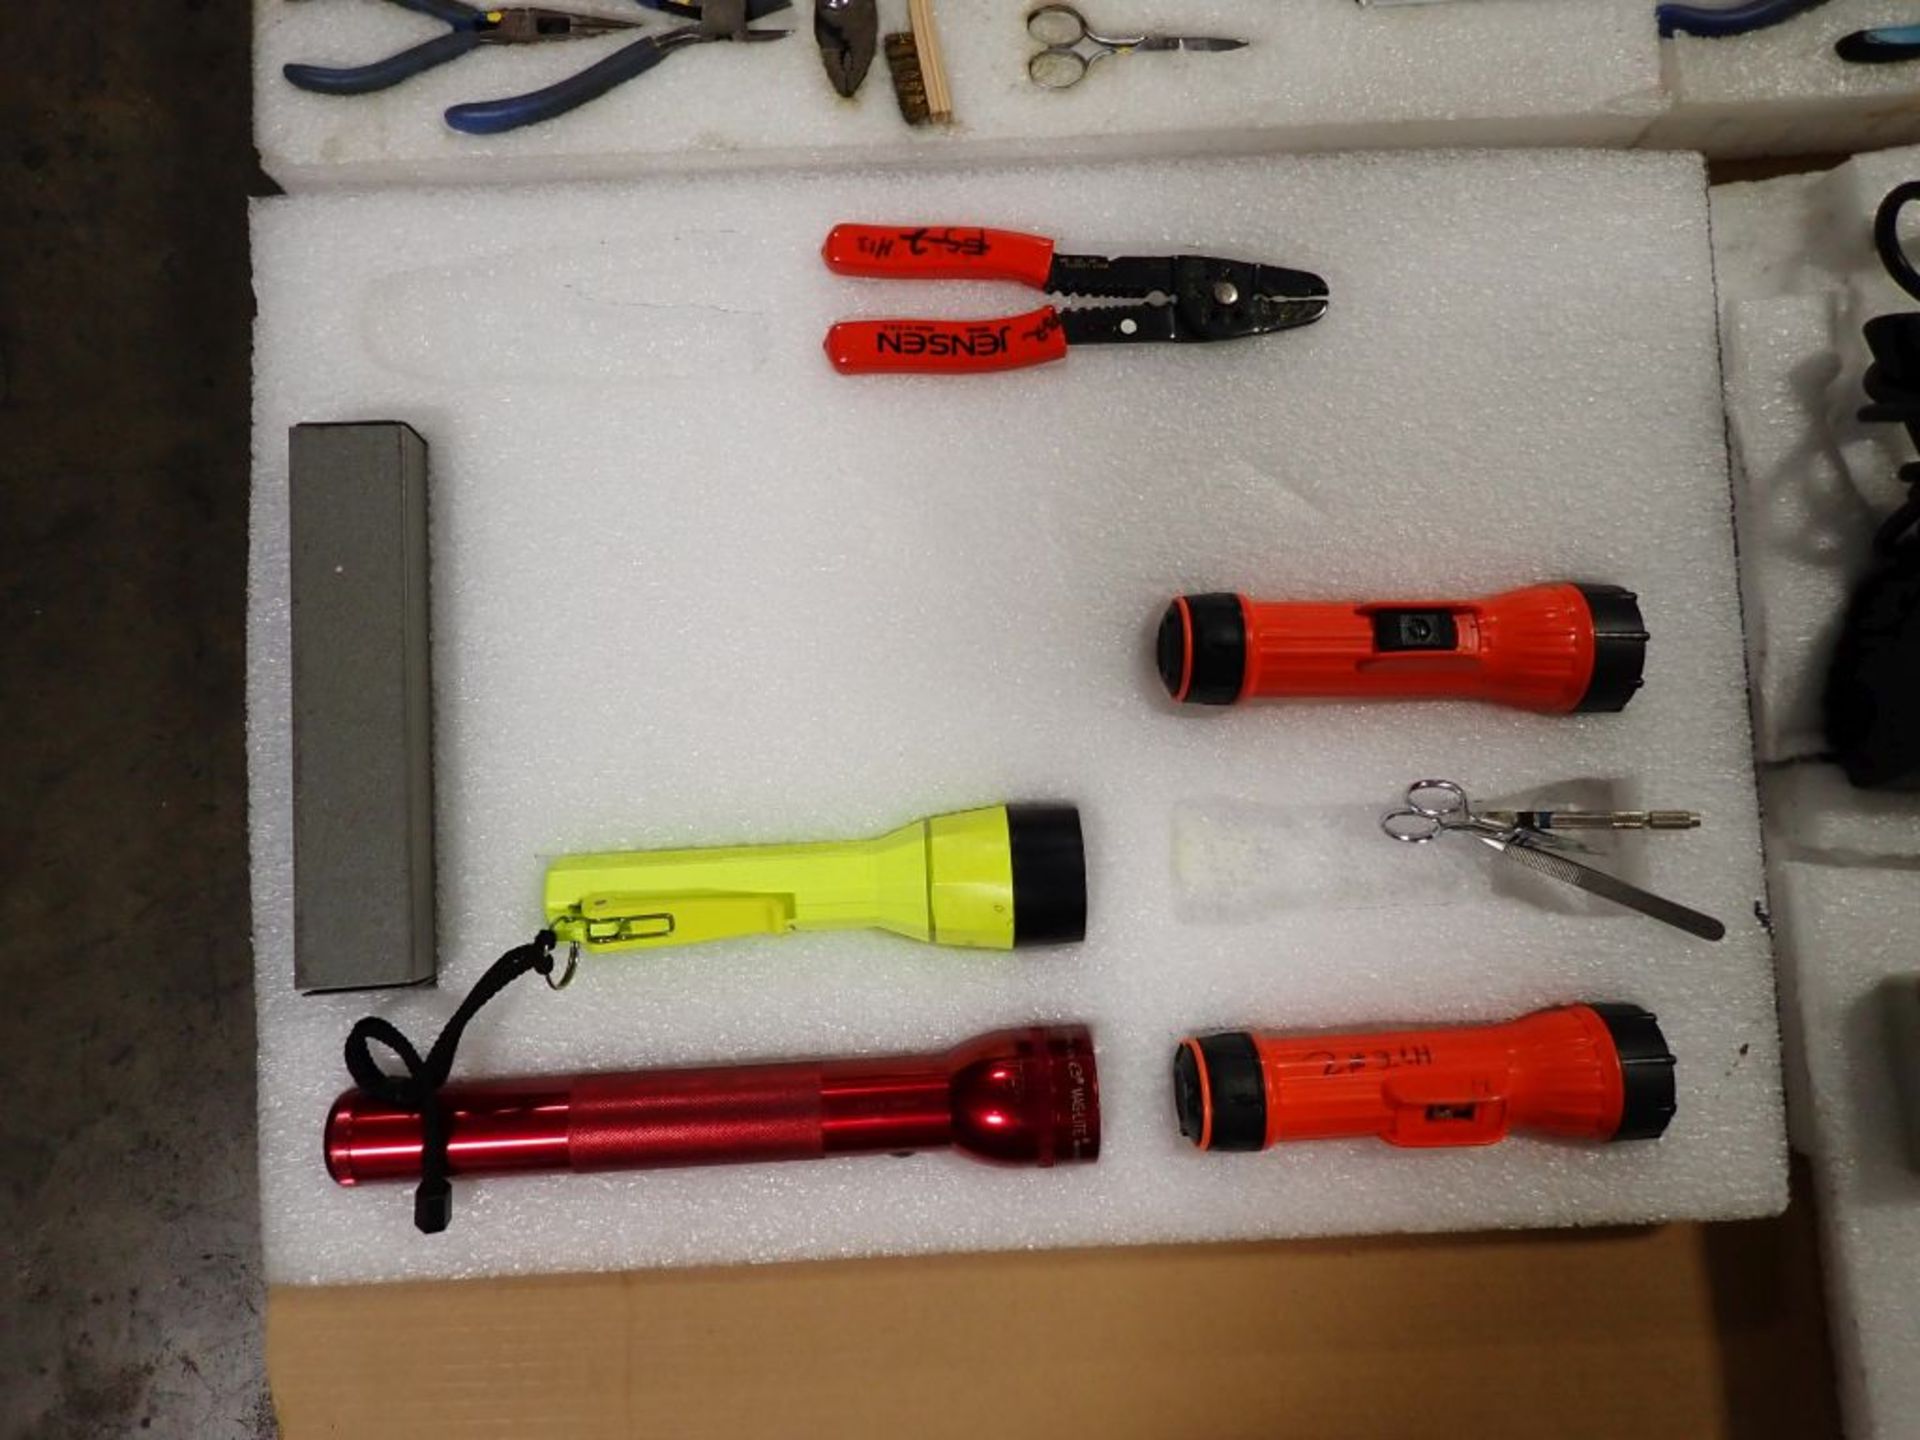 Lot of Assorted Tools & Flashlights | Tag: 241442 | Limited Forklift Assistance Available - $10.00 - Image 2 of 5